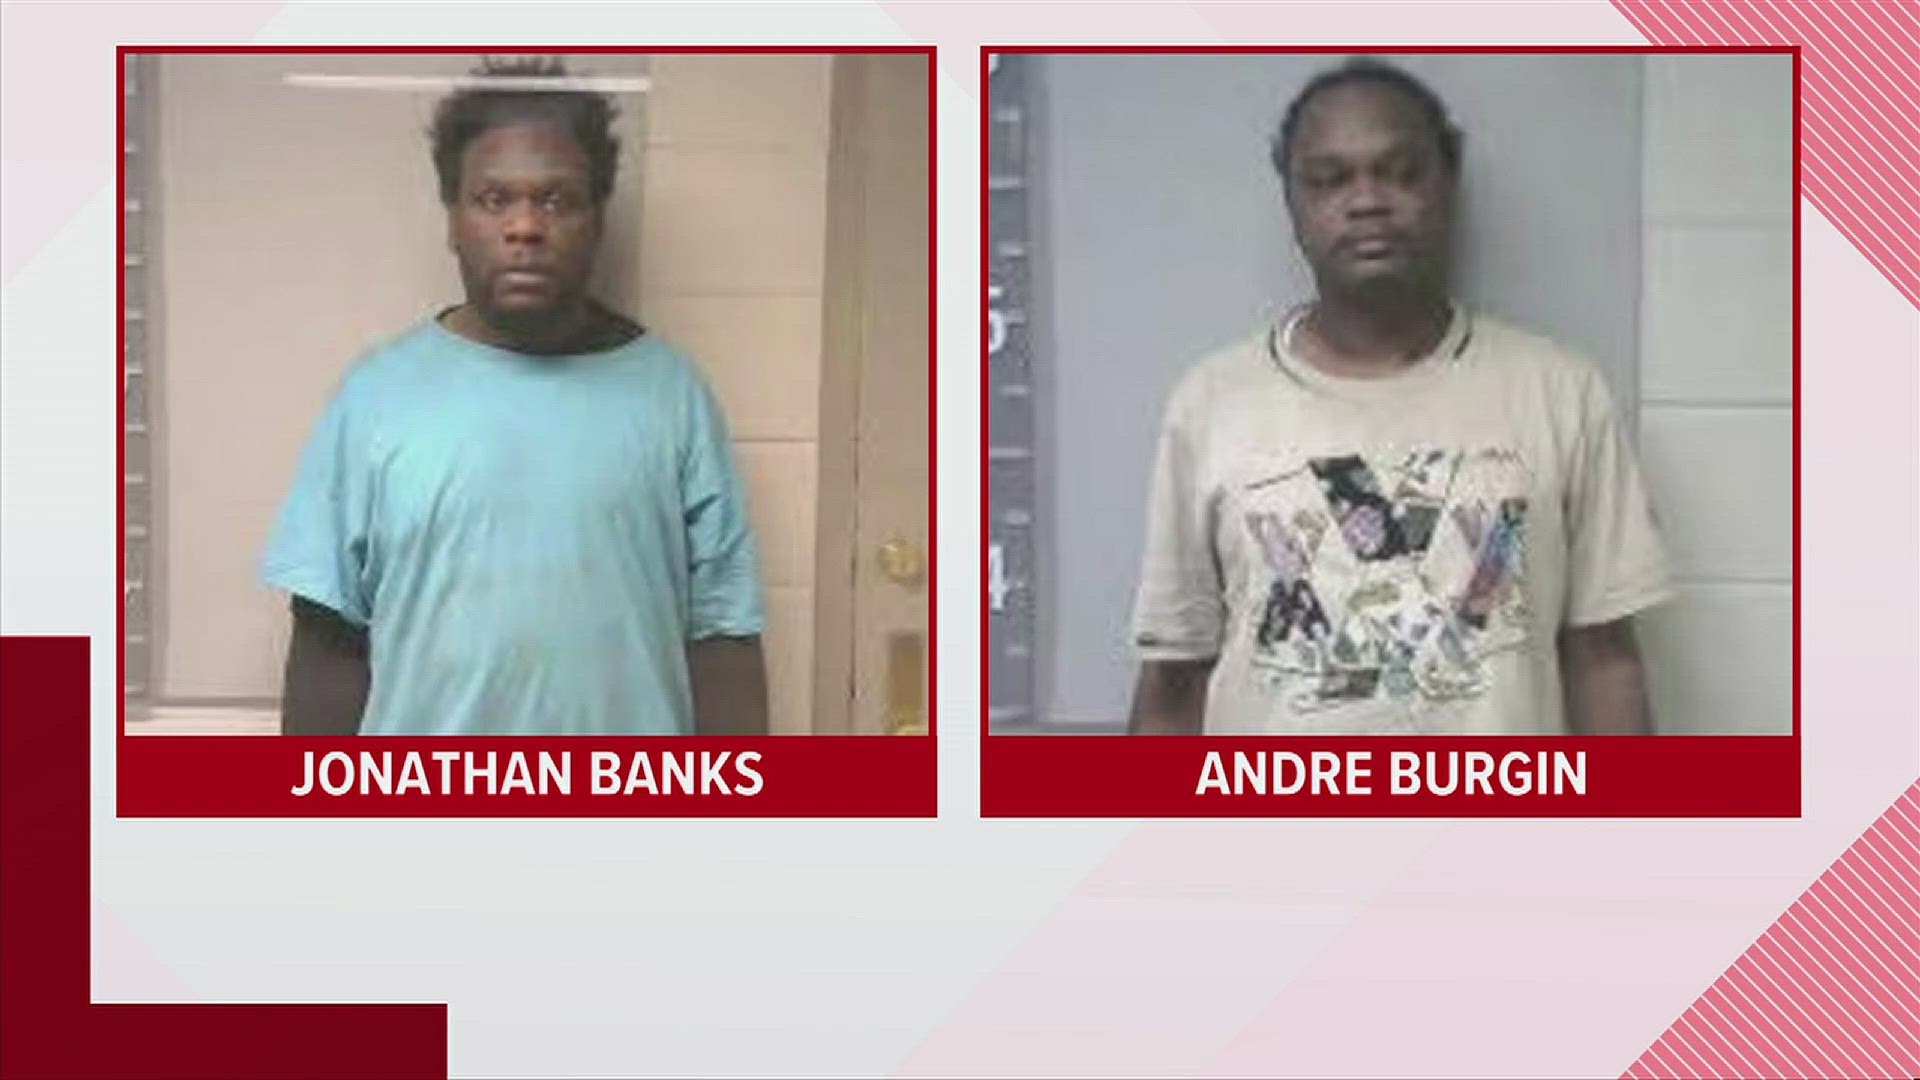 Police say two men were arrested following a standoff in a Birmingham neighborhood after a cross-county crime spree earlier this week.